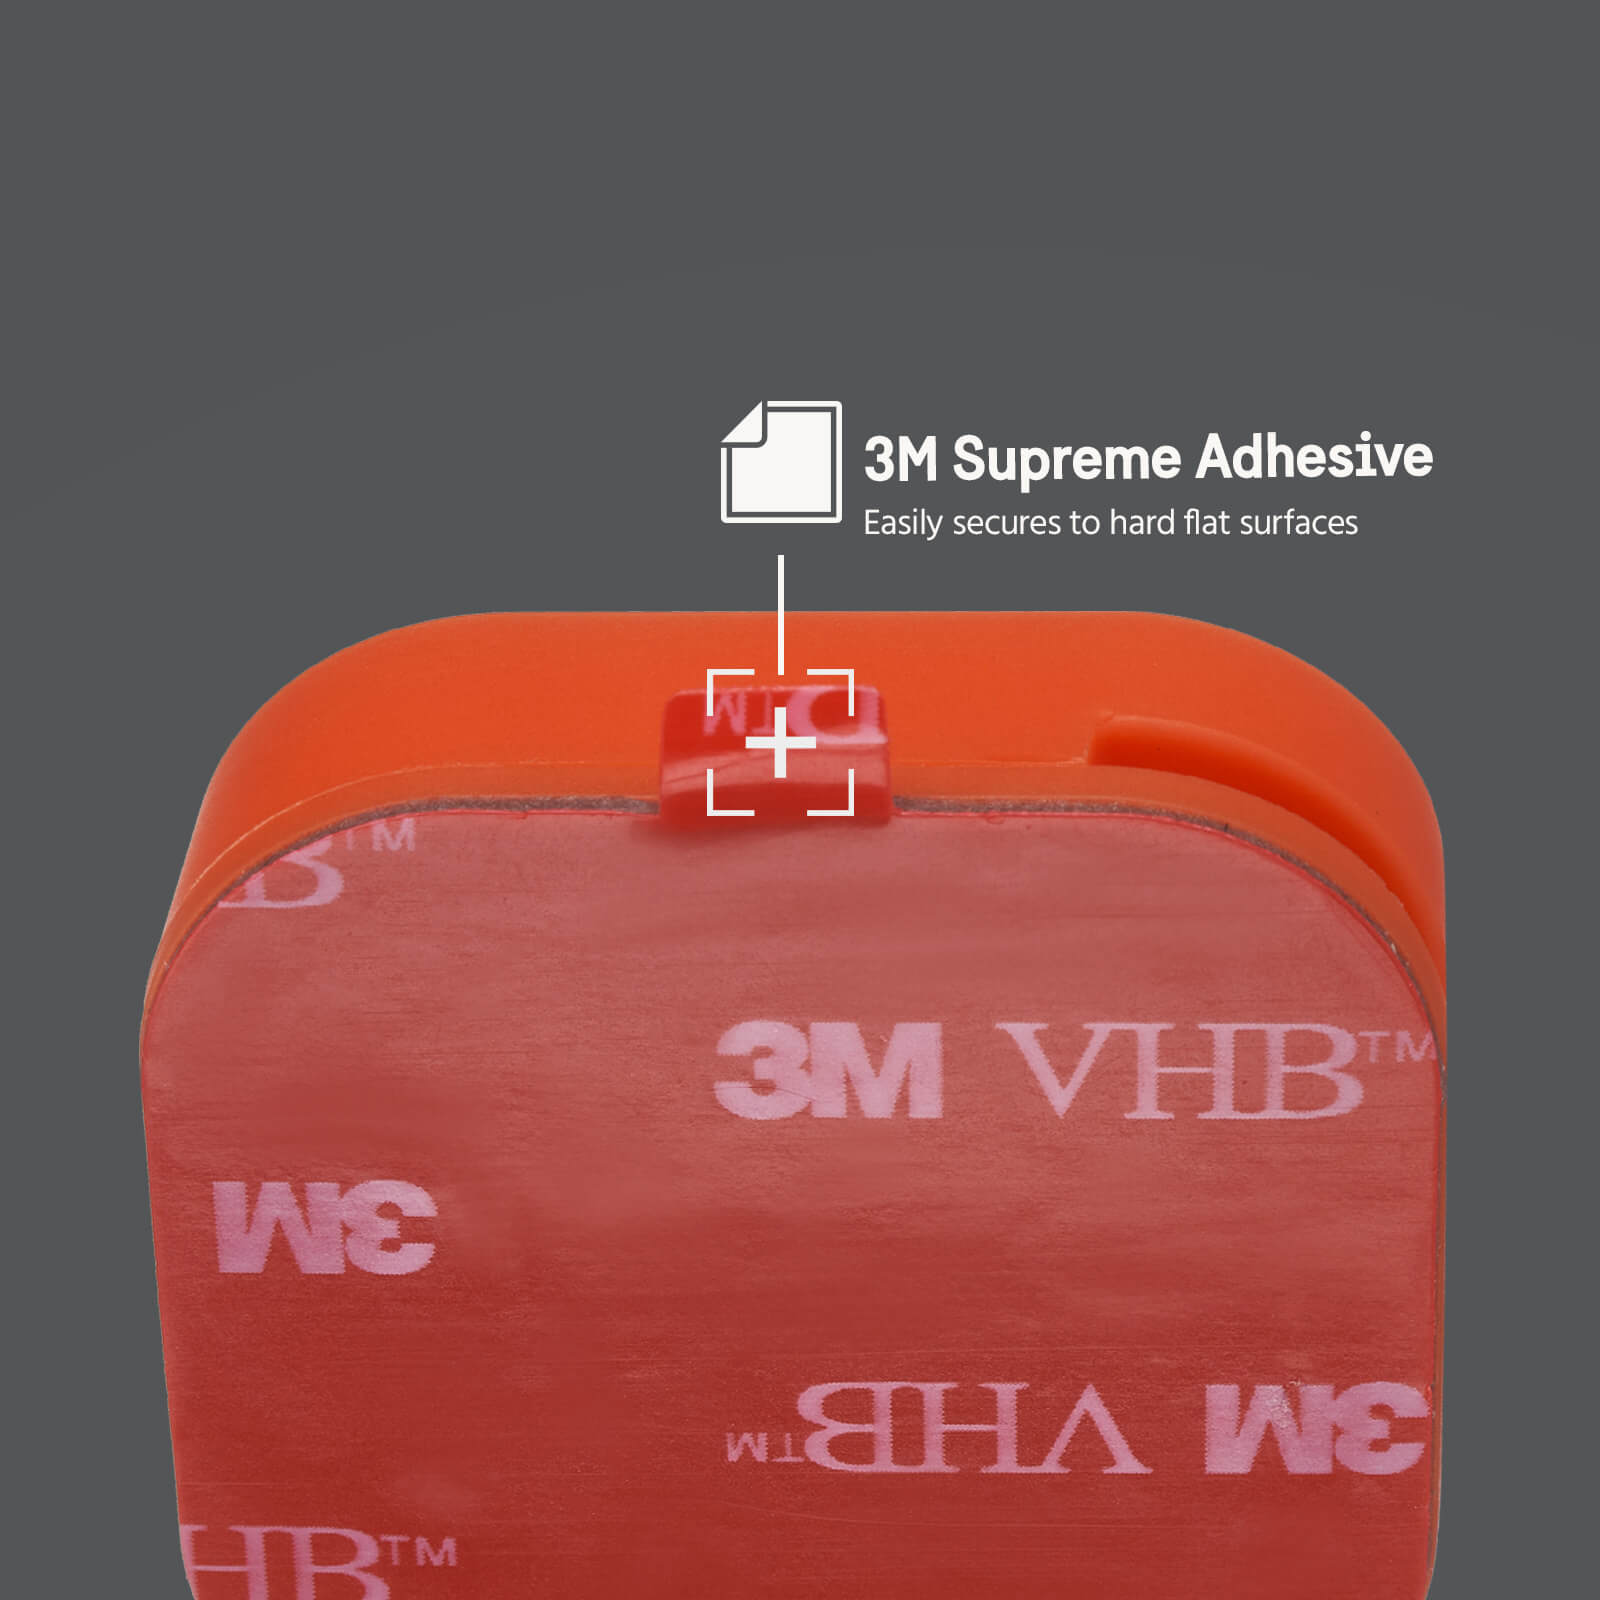 3m supreme adhesive. easily secures to hard flat surfaces. color::Orange